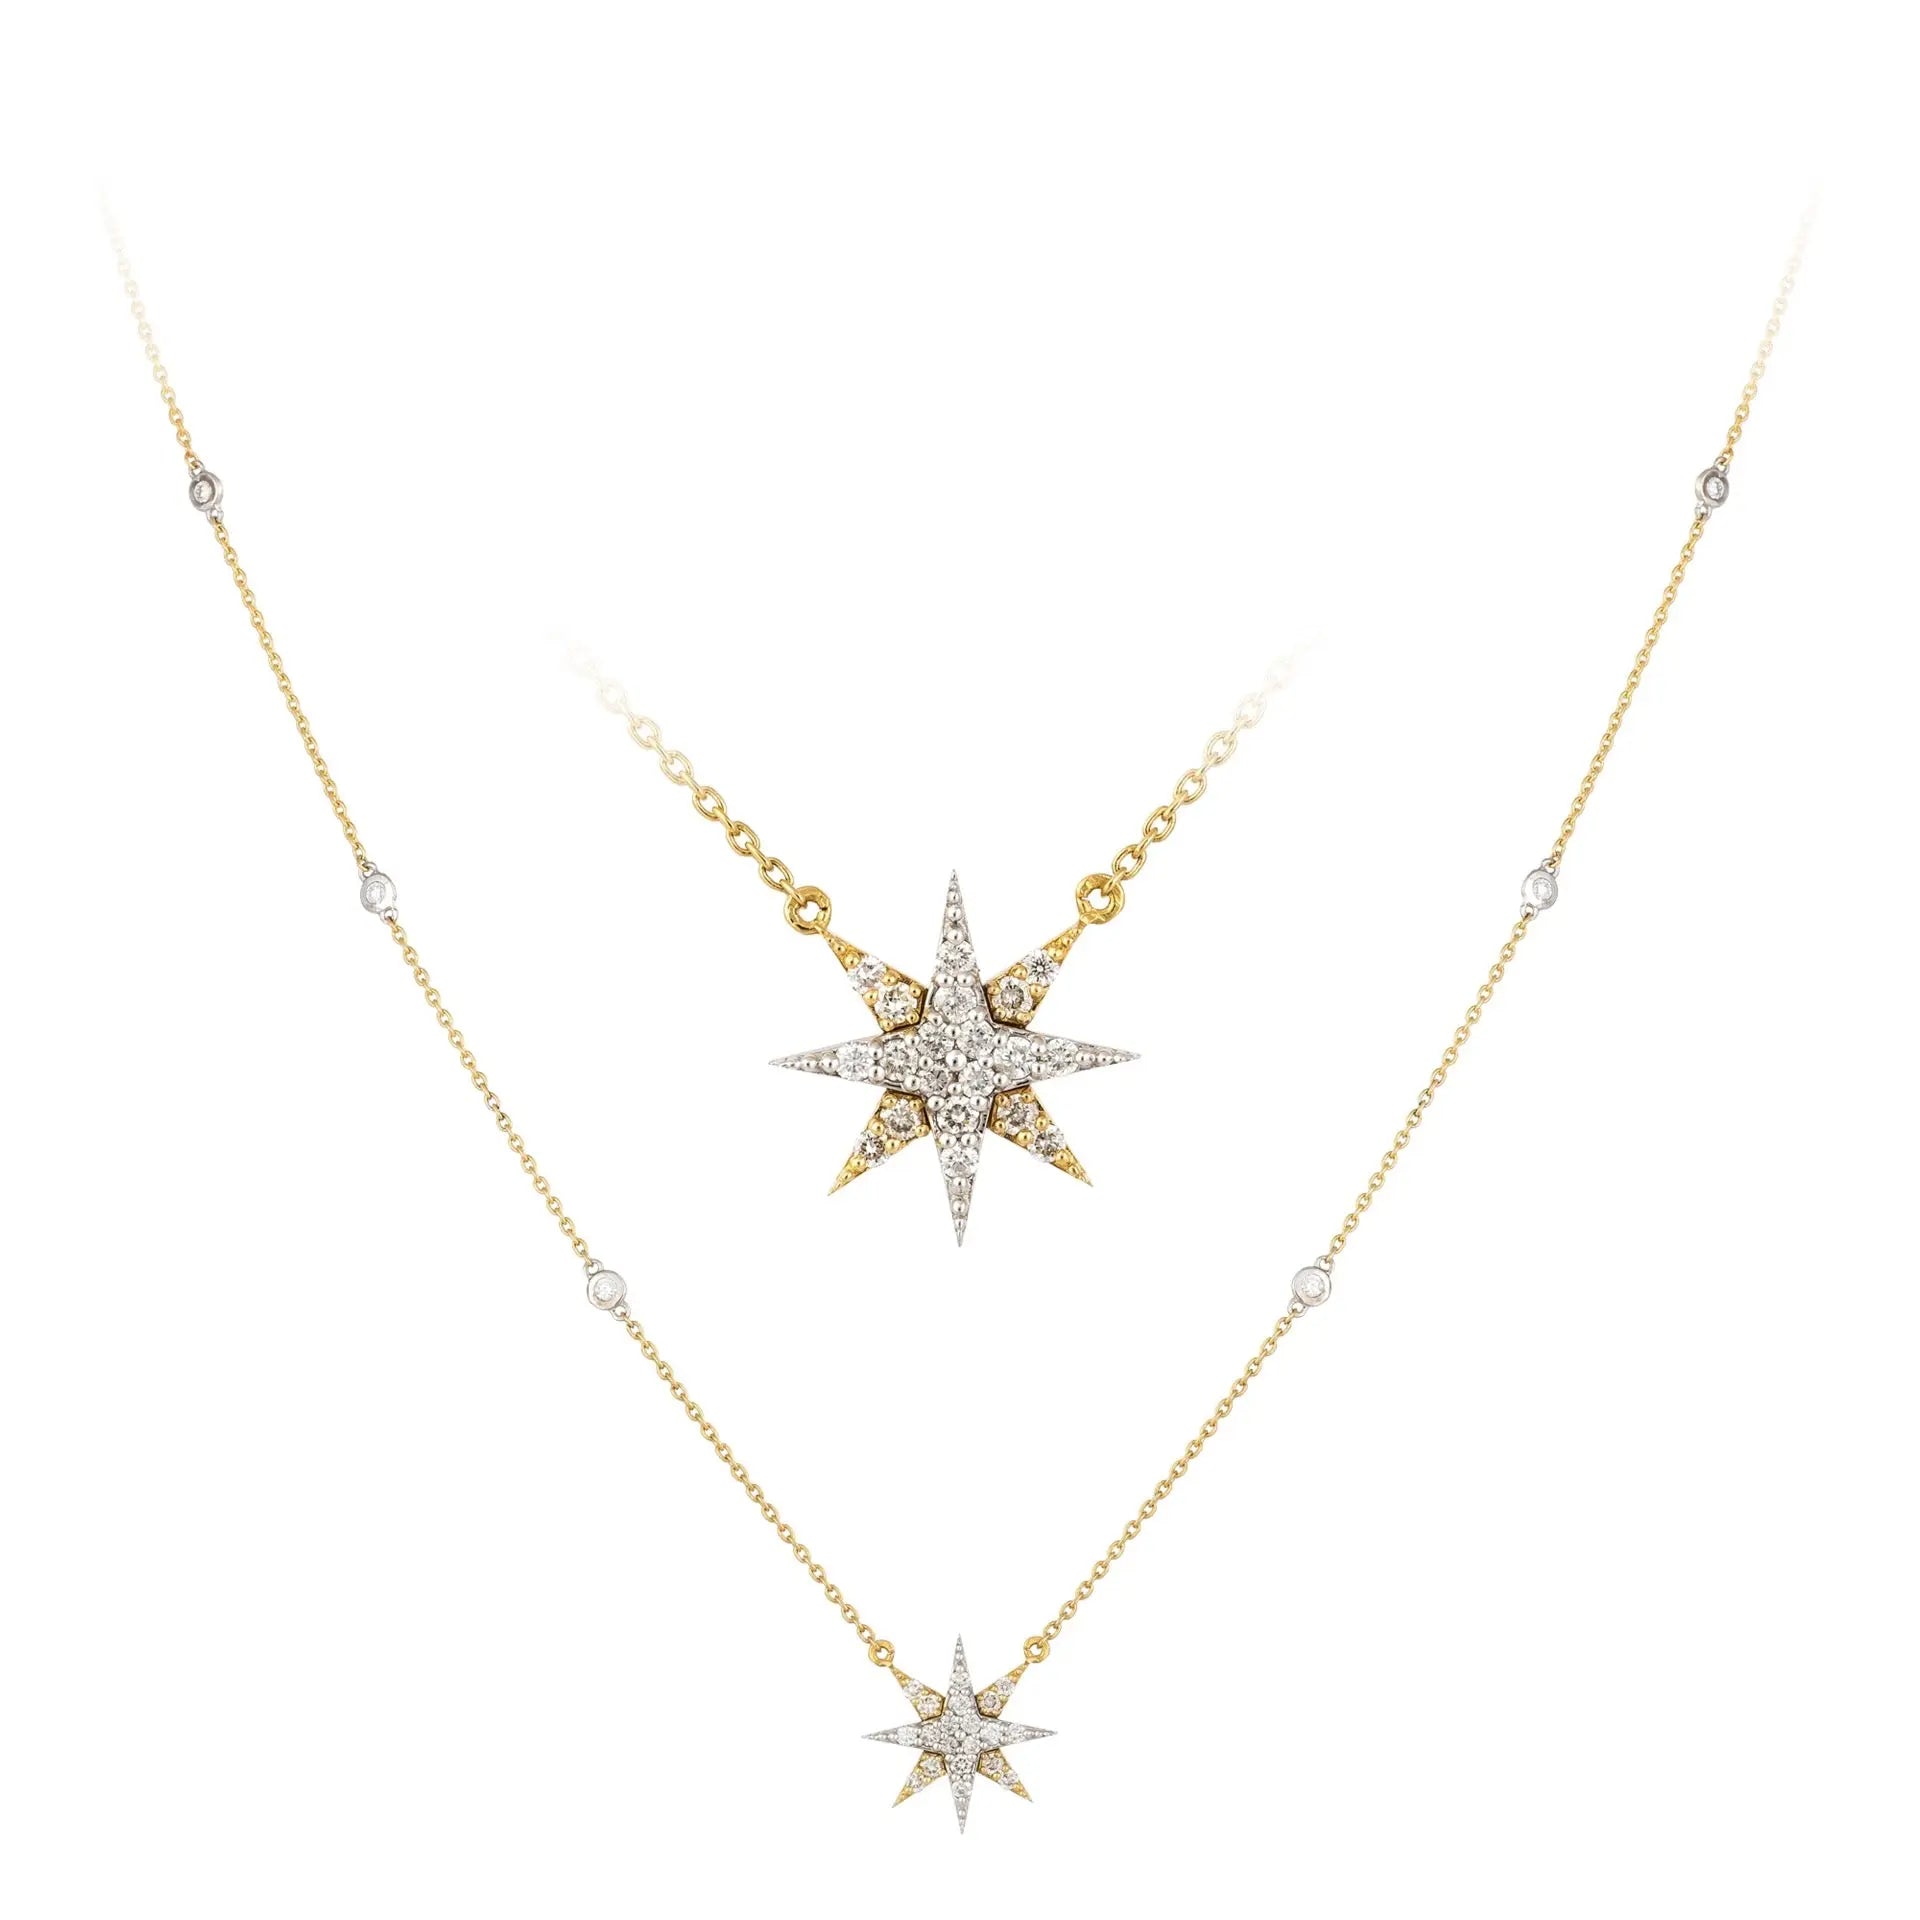 White and Yellow Gold Star Diamond Necklace - Danson Jewelers White Gold Necklaces 